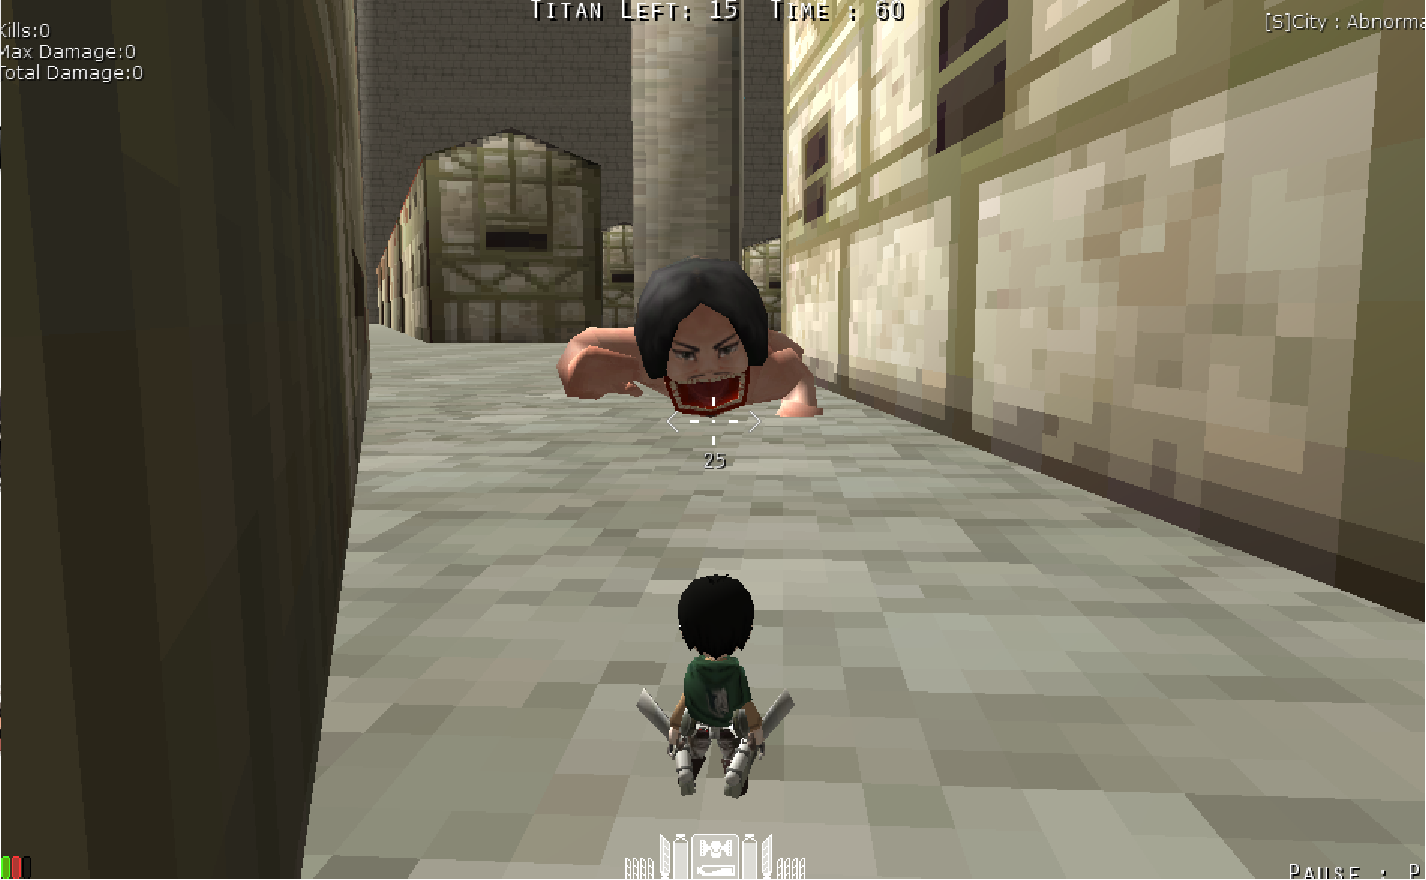 attack on titan game online fenglee